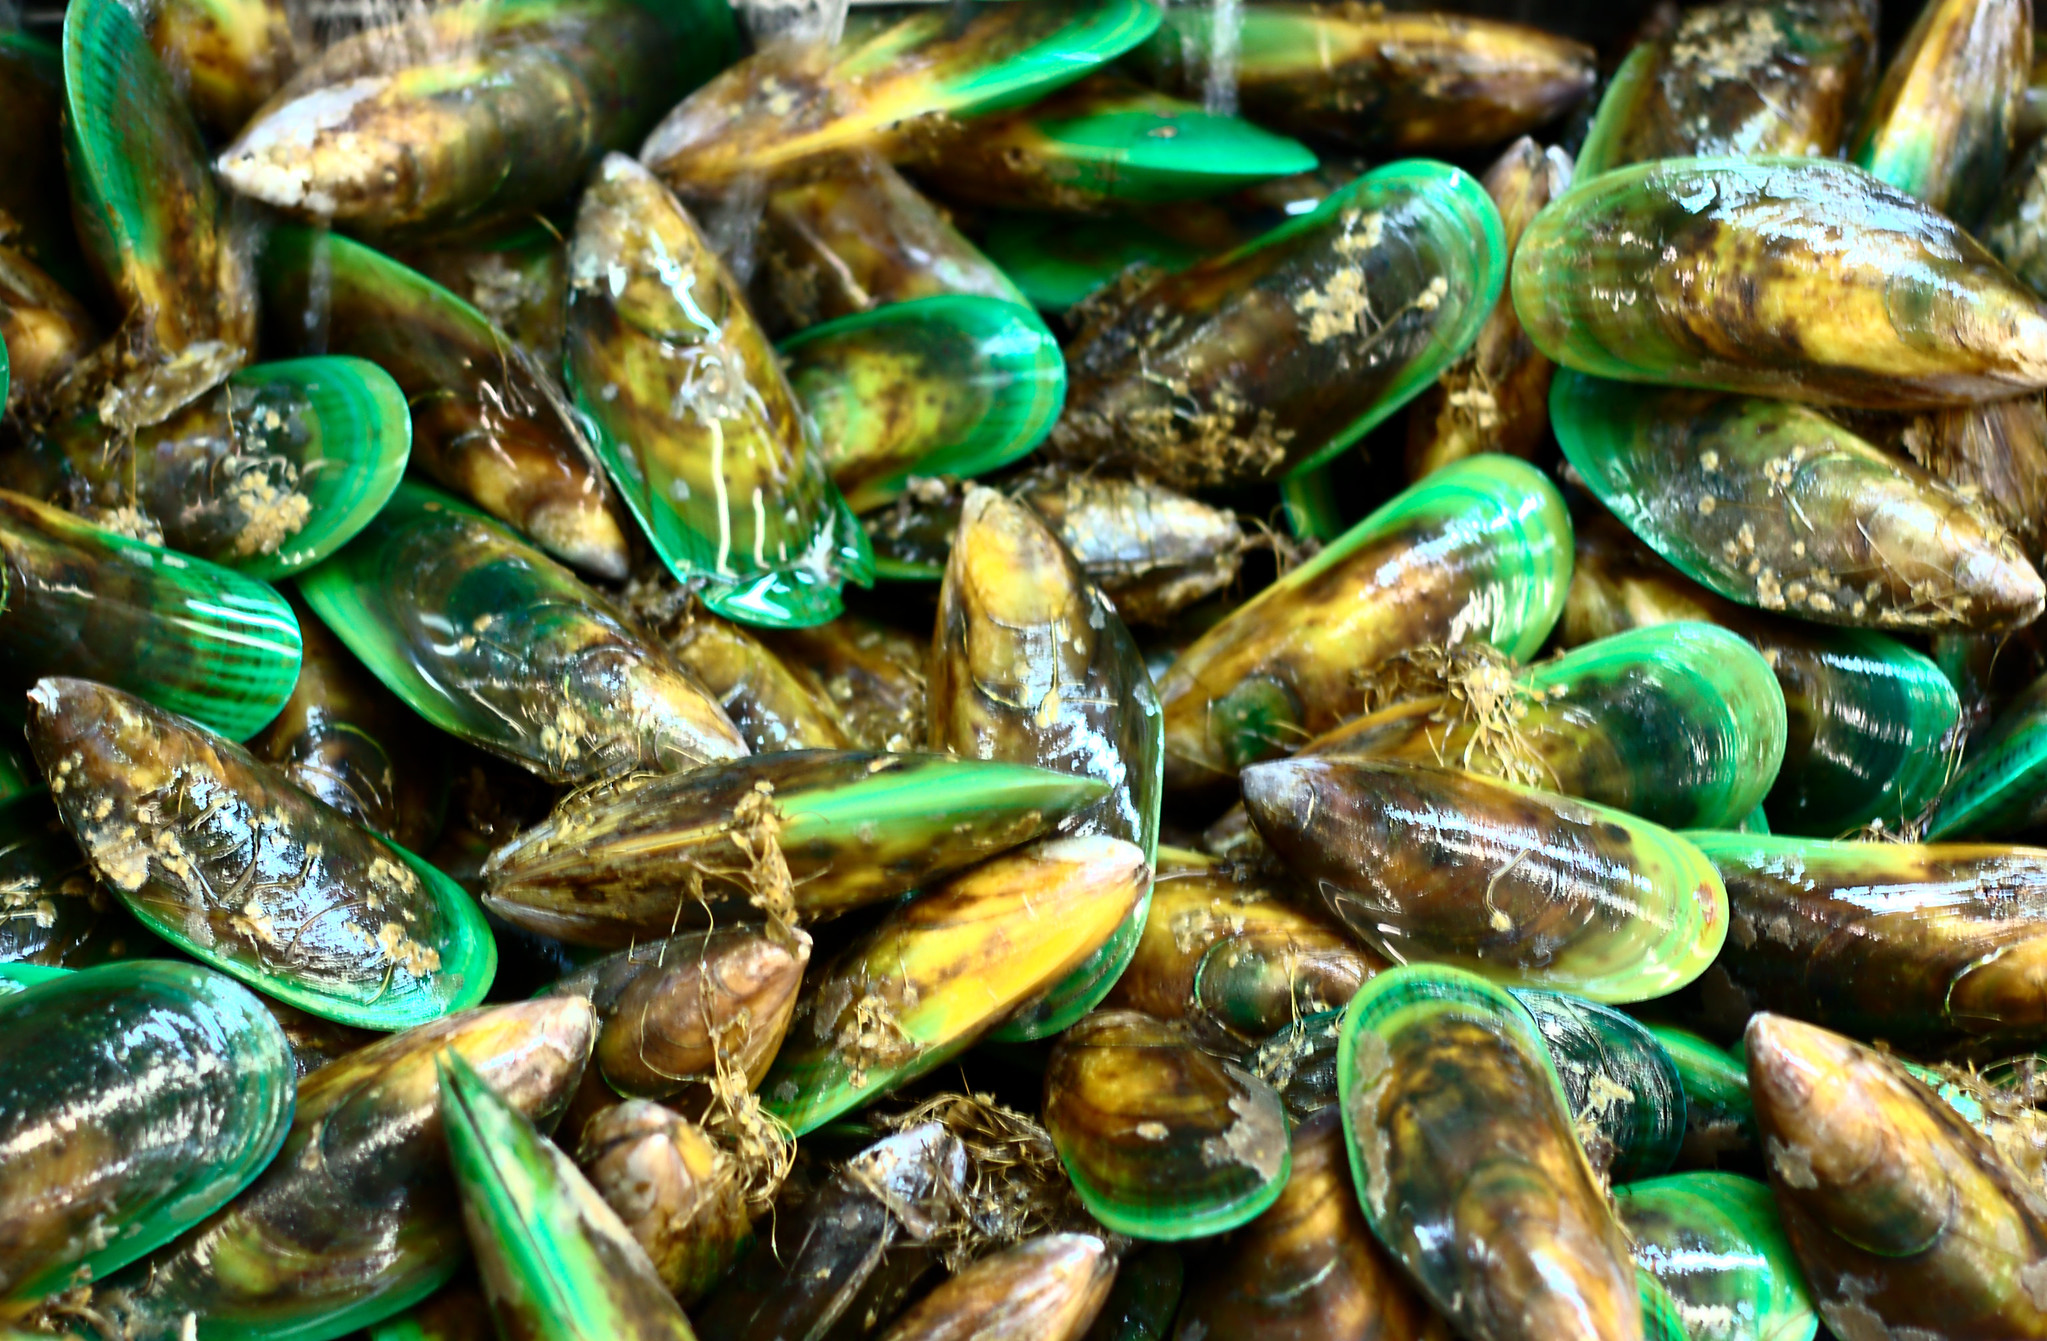 Green-lipped mussels (by Adrian Midgley CC BY-NC-ND 2.0 DEED via Flickr).